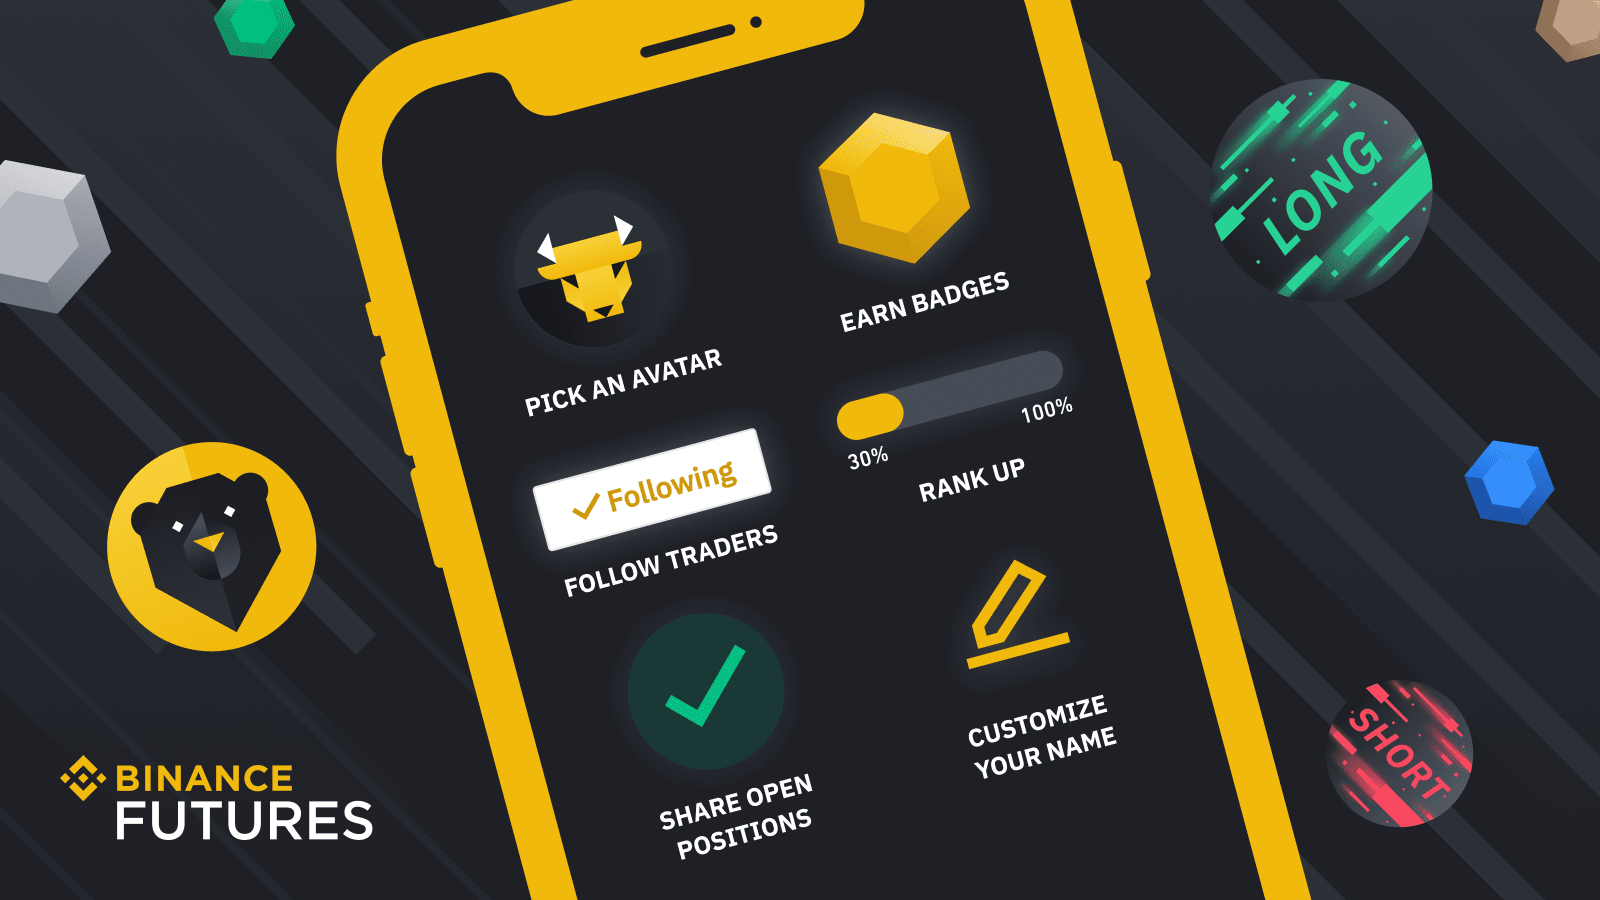 Cool Features On Binance Futures That You Should Try Out